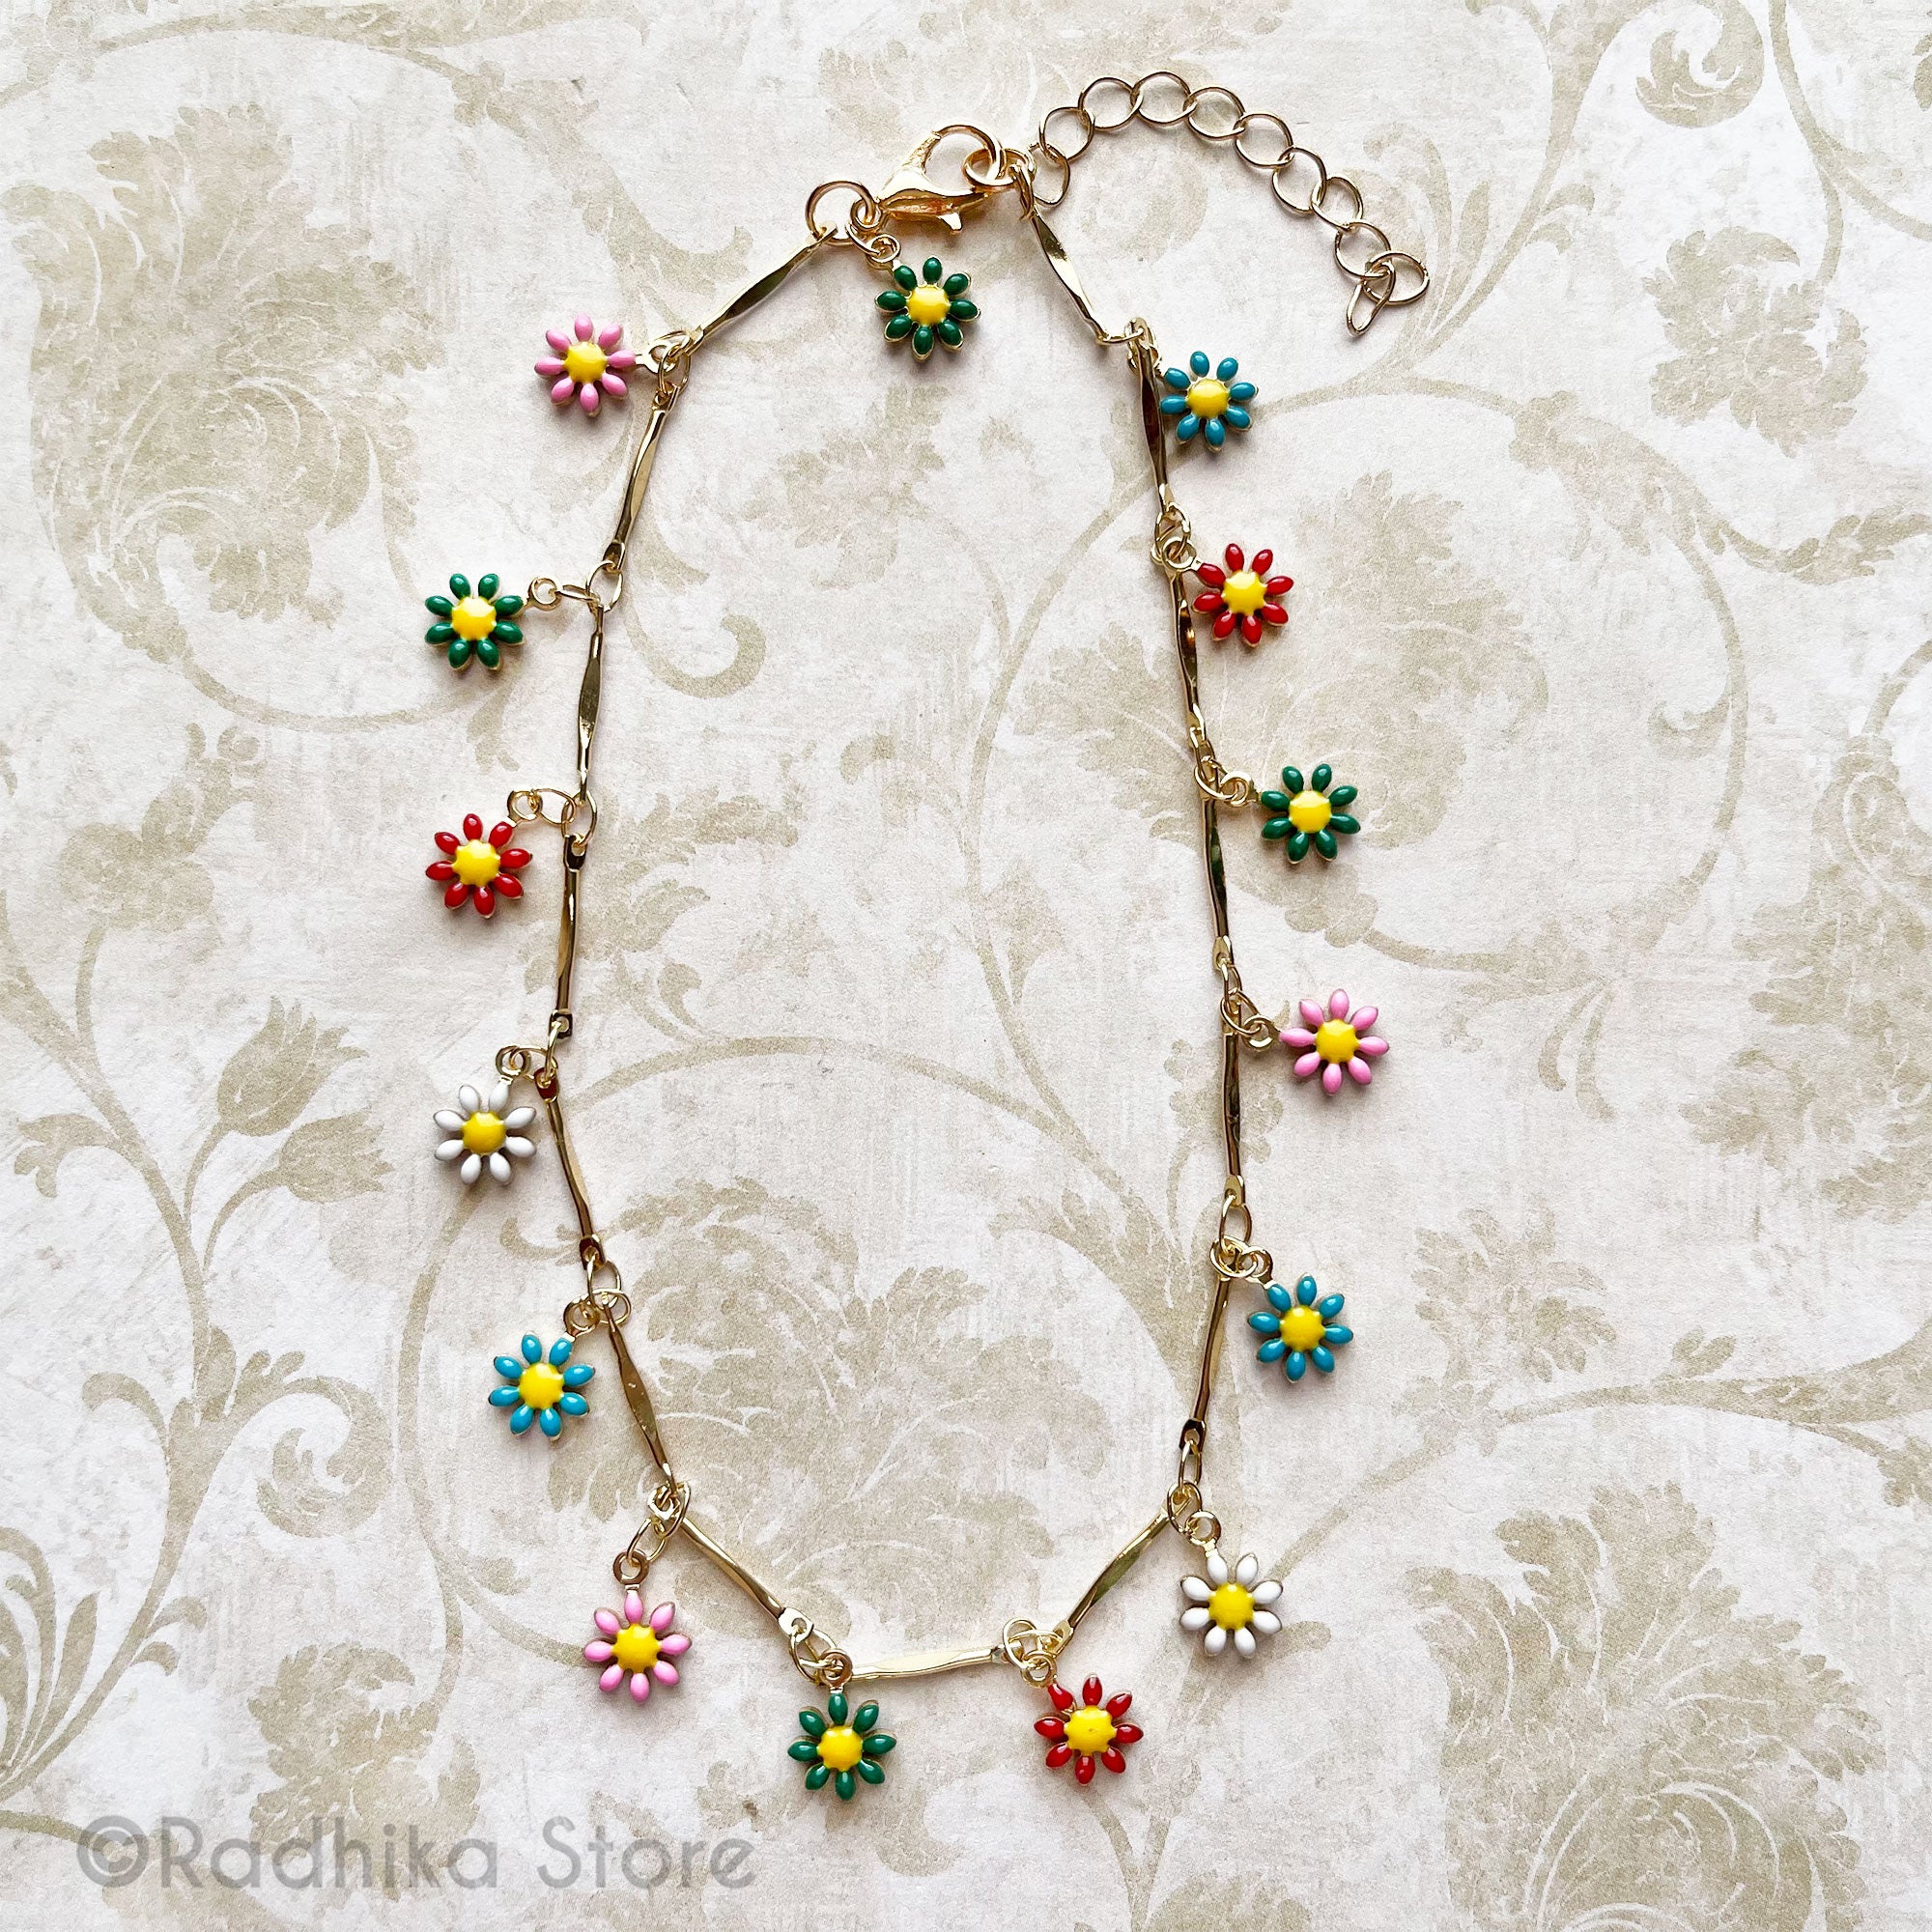 DIY Pearl Daisy Chain Necklace | Diy pearl necklace, Beaded necklace diy, Beaded  jewelry